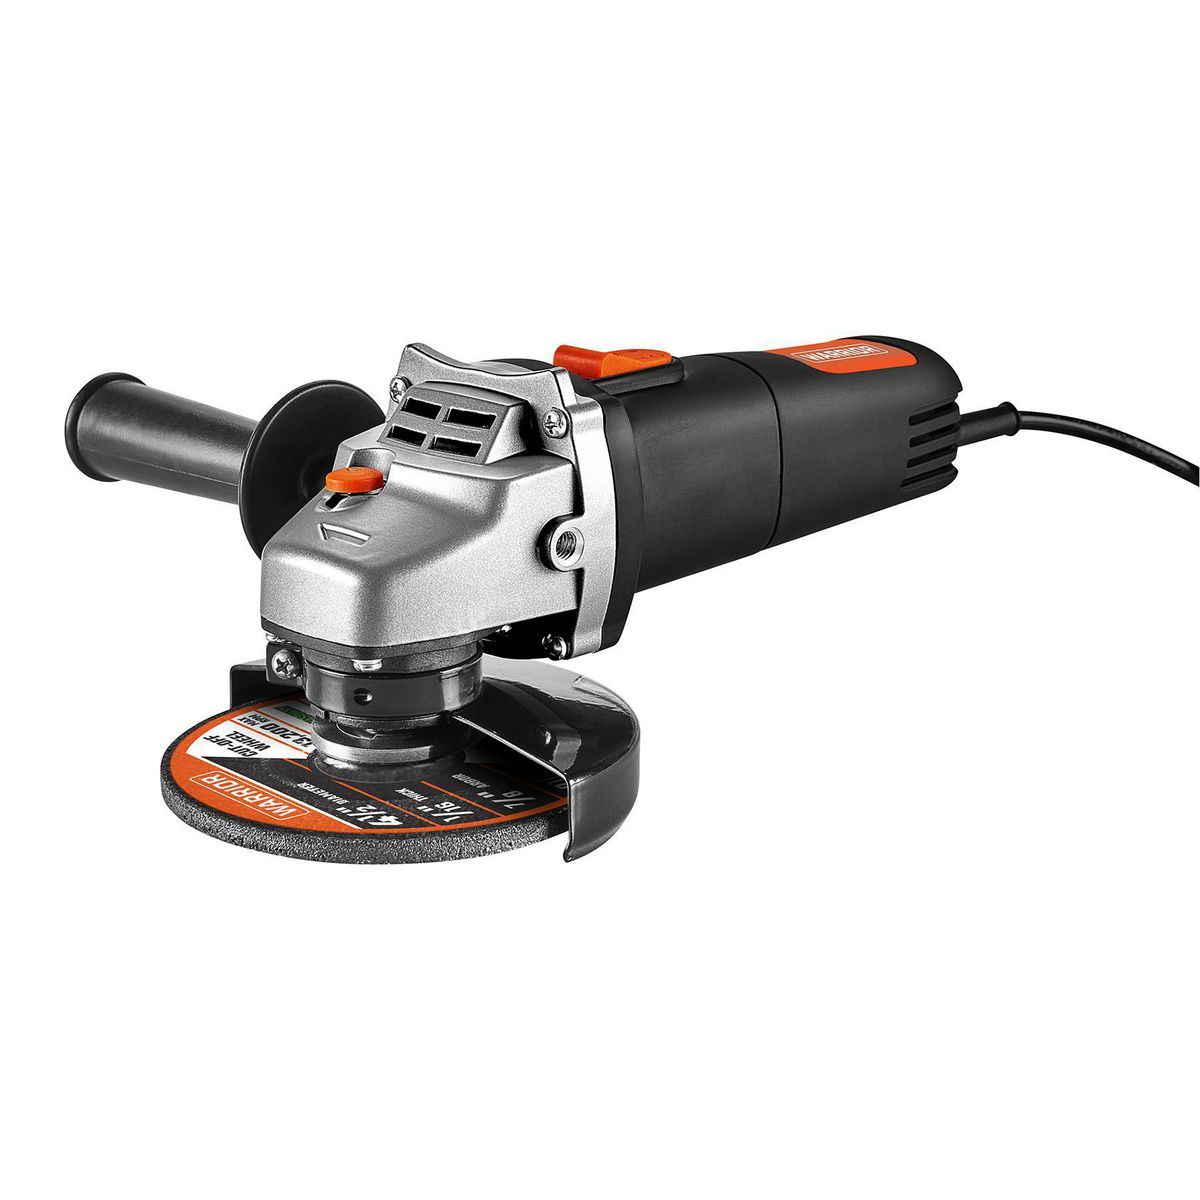 WARRIOR 4.3 Amp, 4-1/2 in.  Angle Grinder with Slide Switch